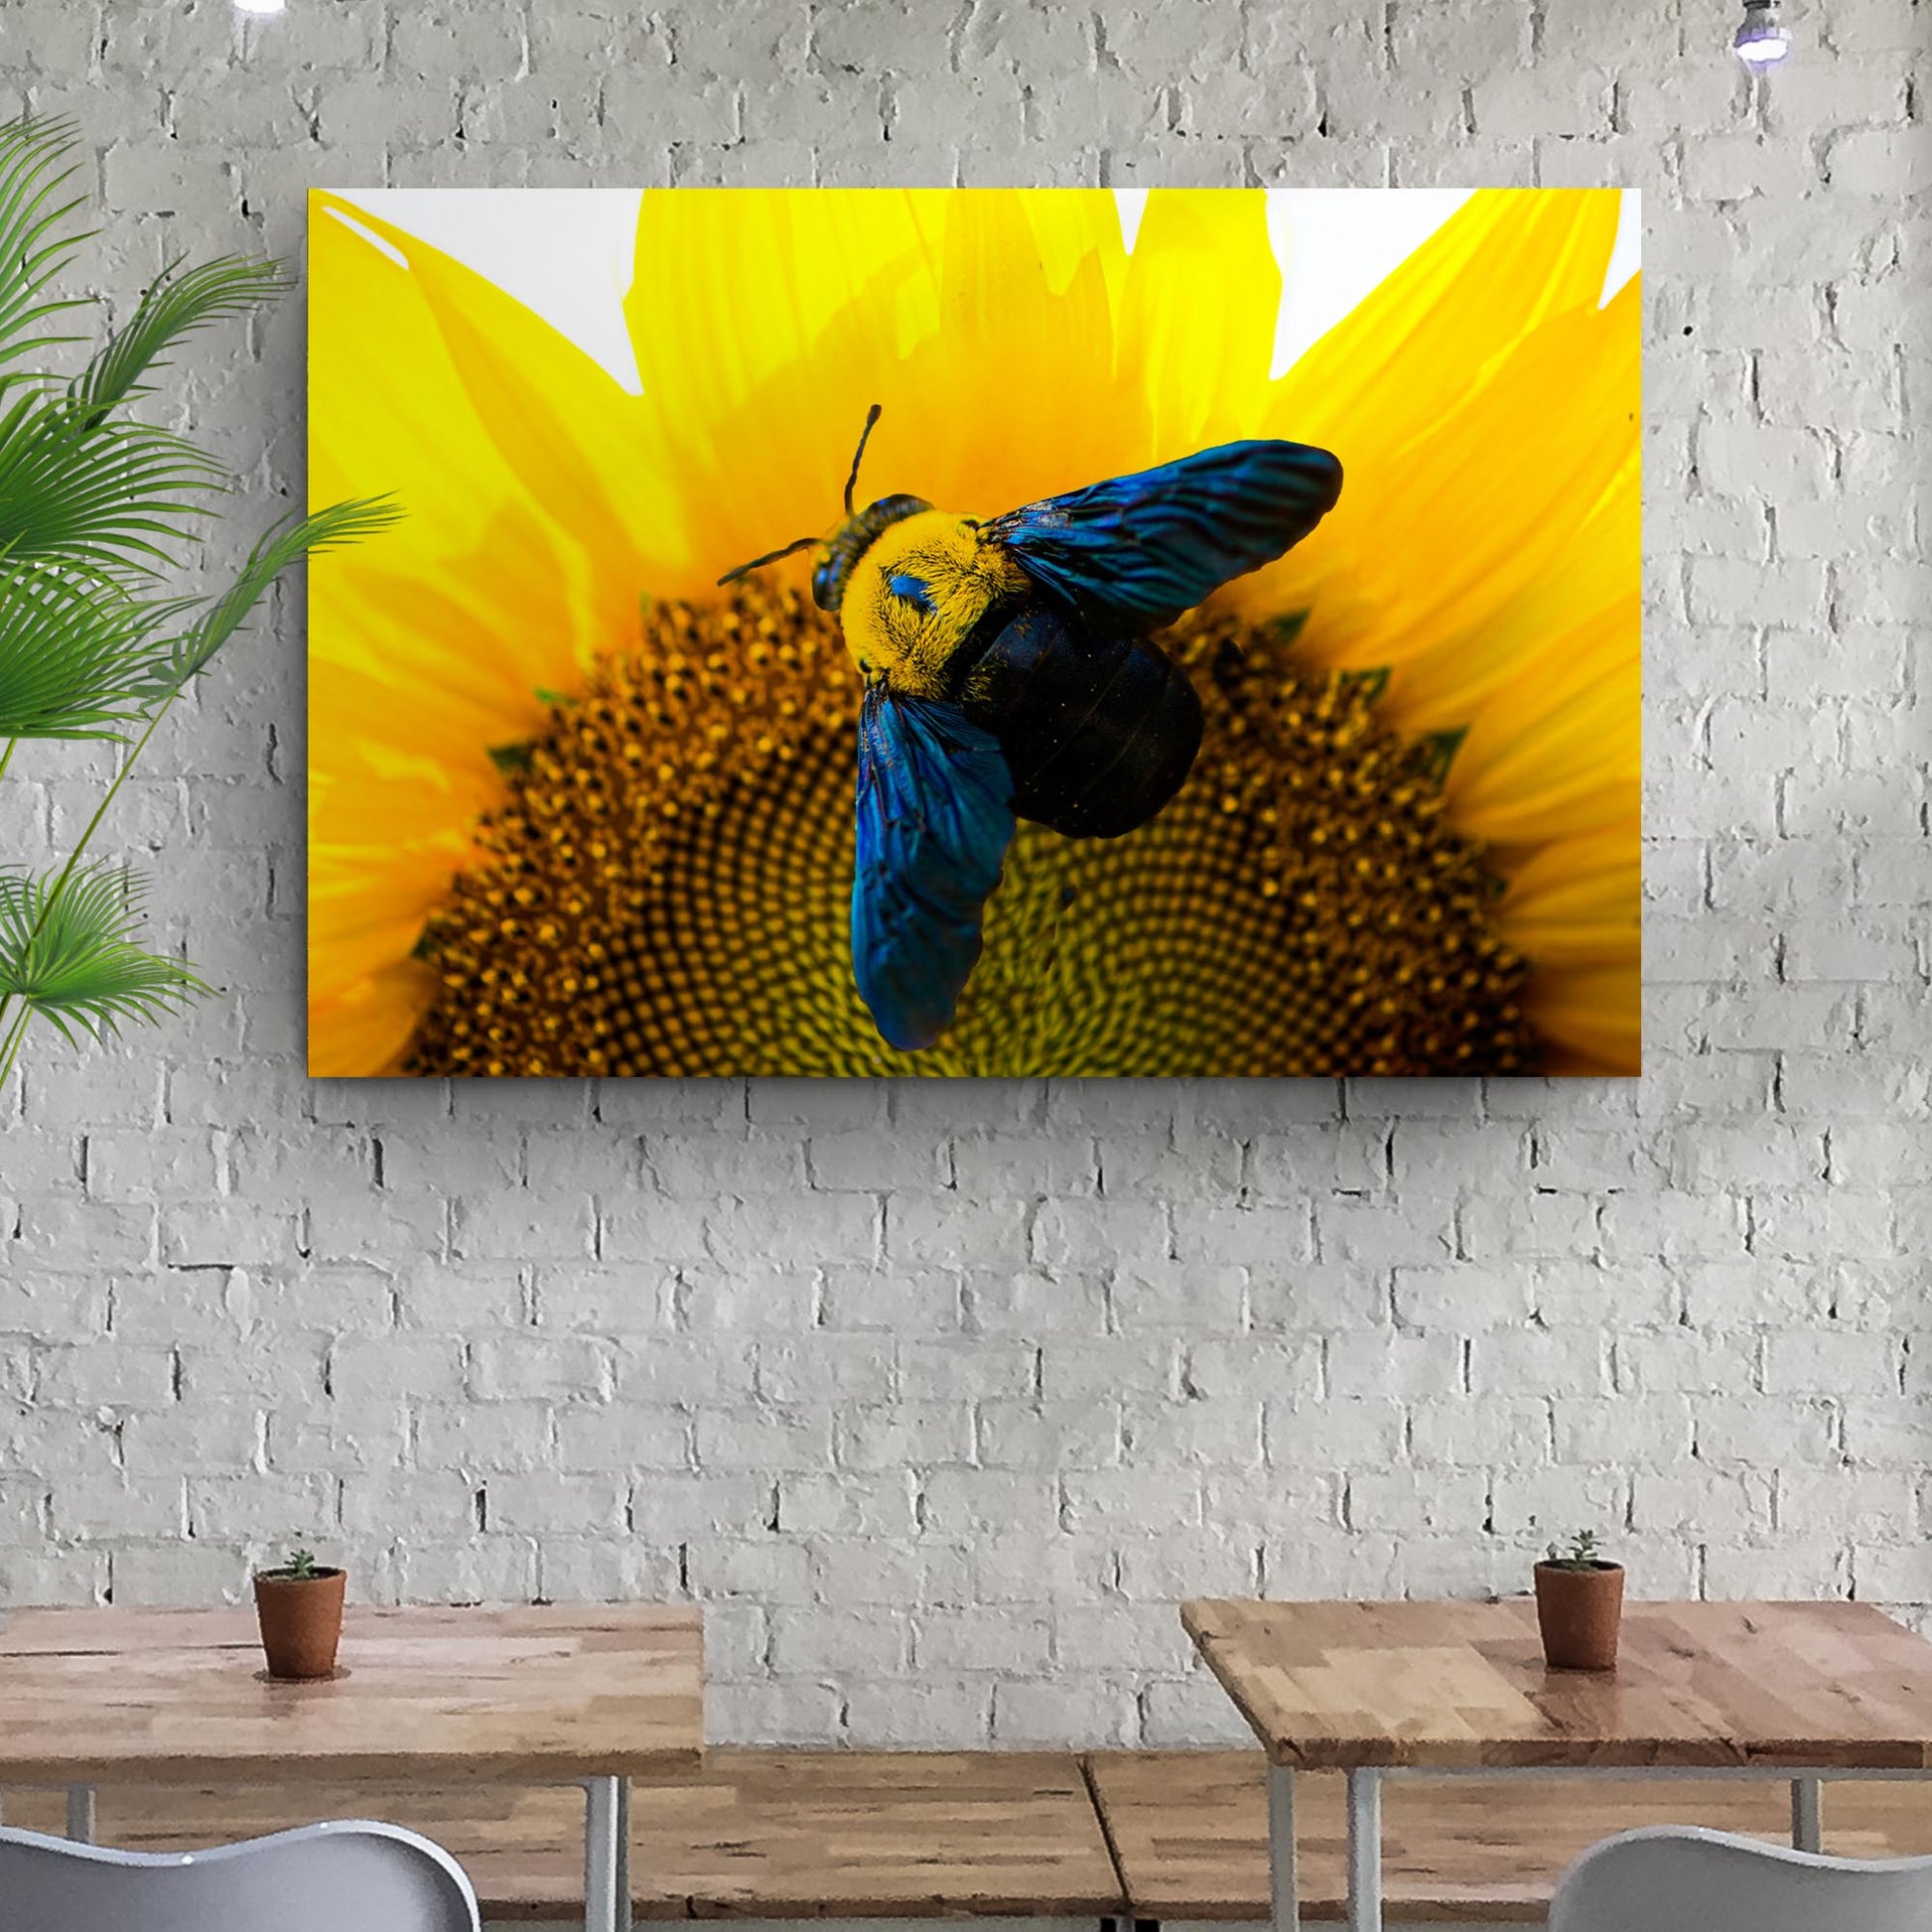 Bee Hoverfly Above A Sunflower Canvas Wall Art - Image by Tailored Canvases